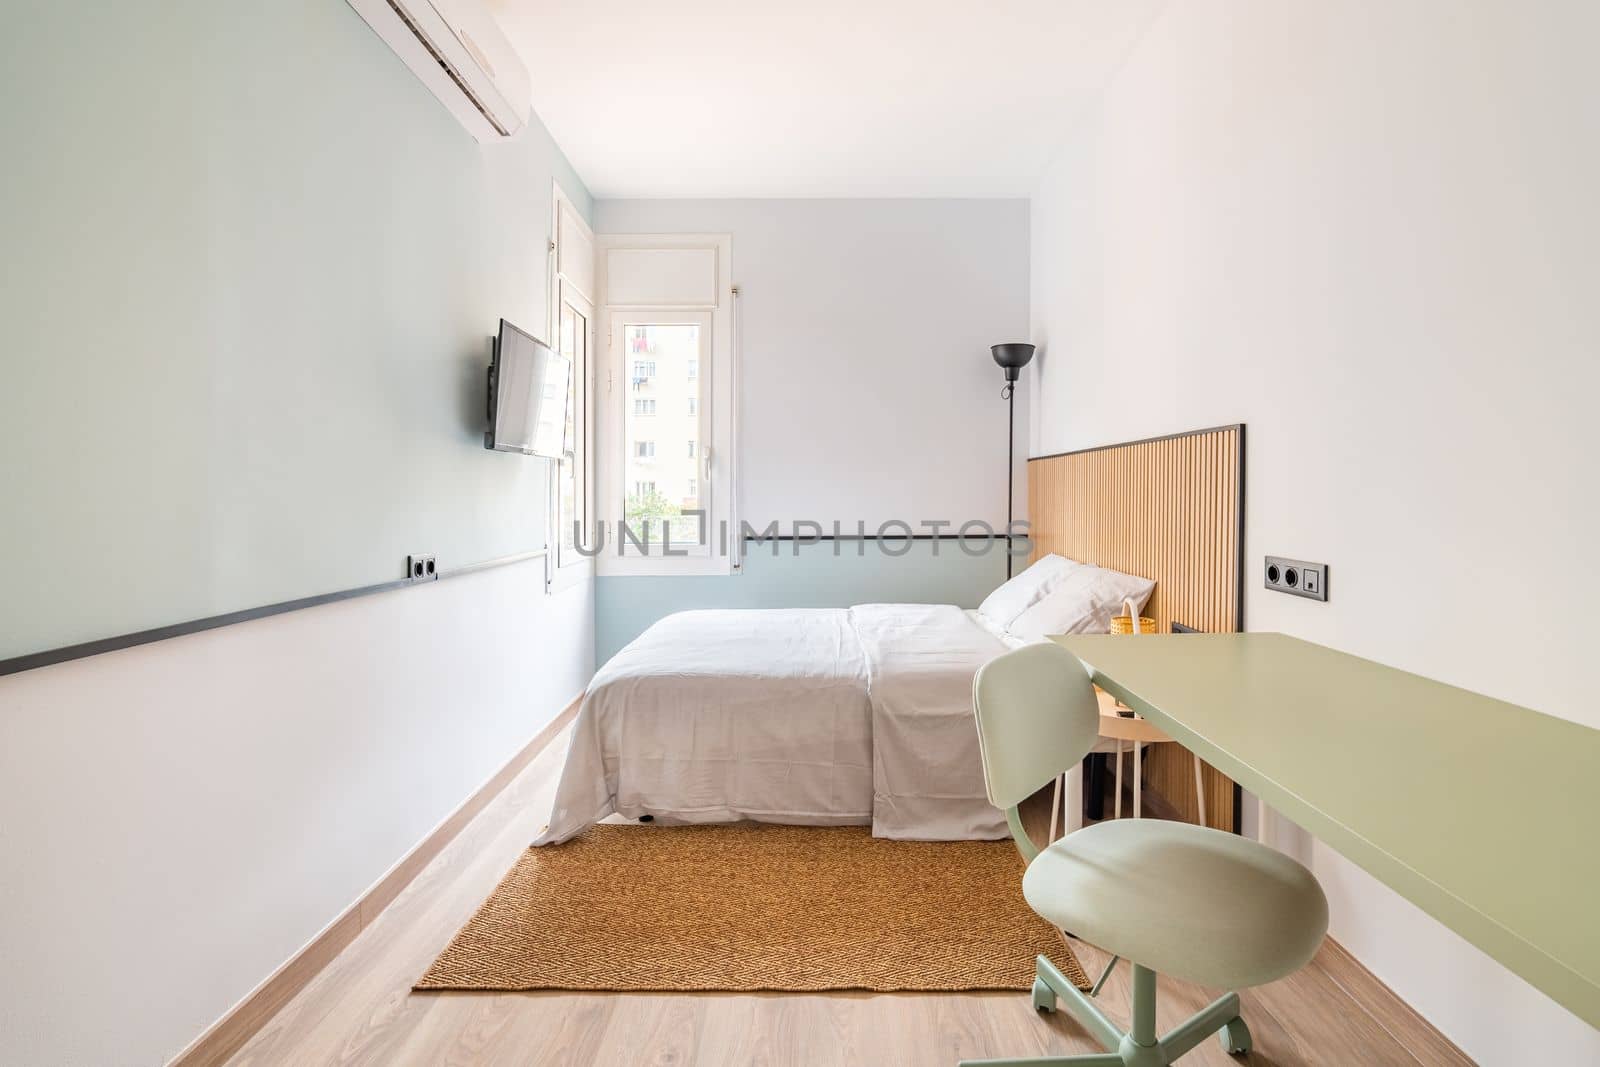 Narrow long room with bed, on opposite wall is TV for viewing watchable content. In corner is floor lamp with black shade for soft lighting at night. On floor is soft warm brown carpet. by apavlin